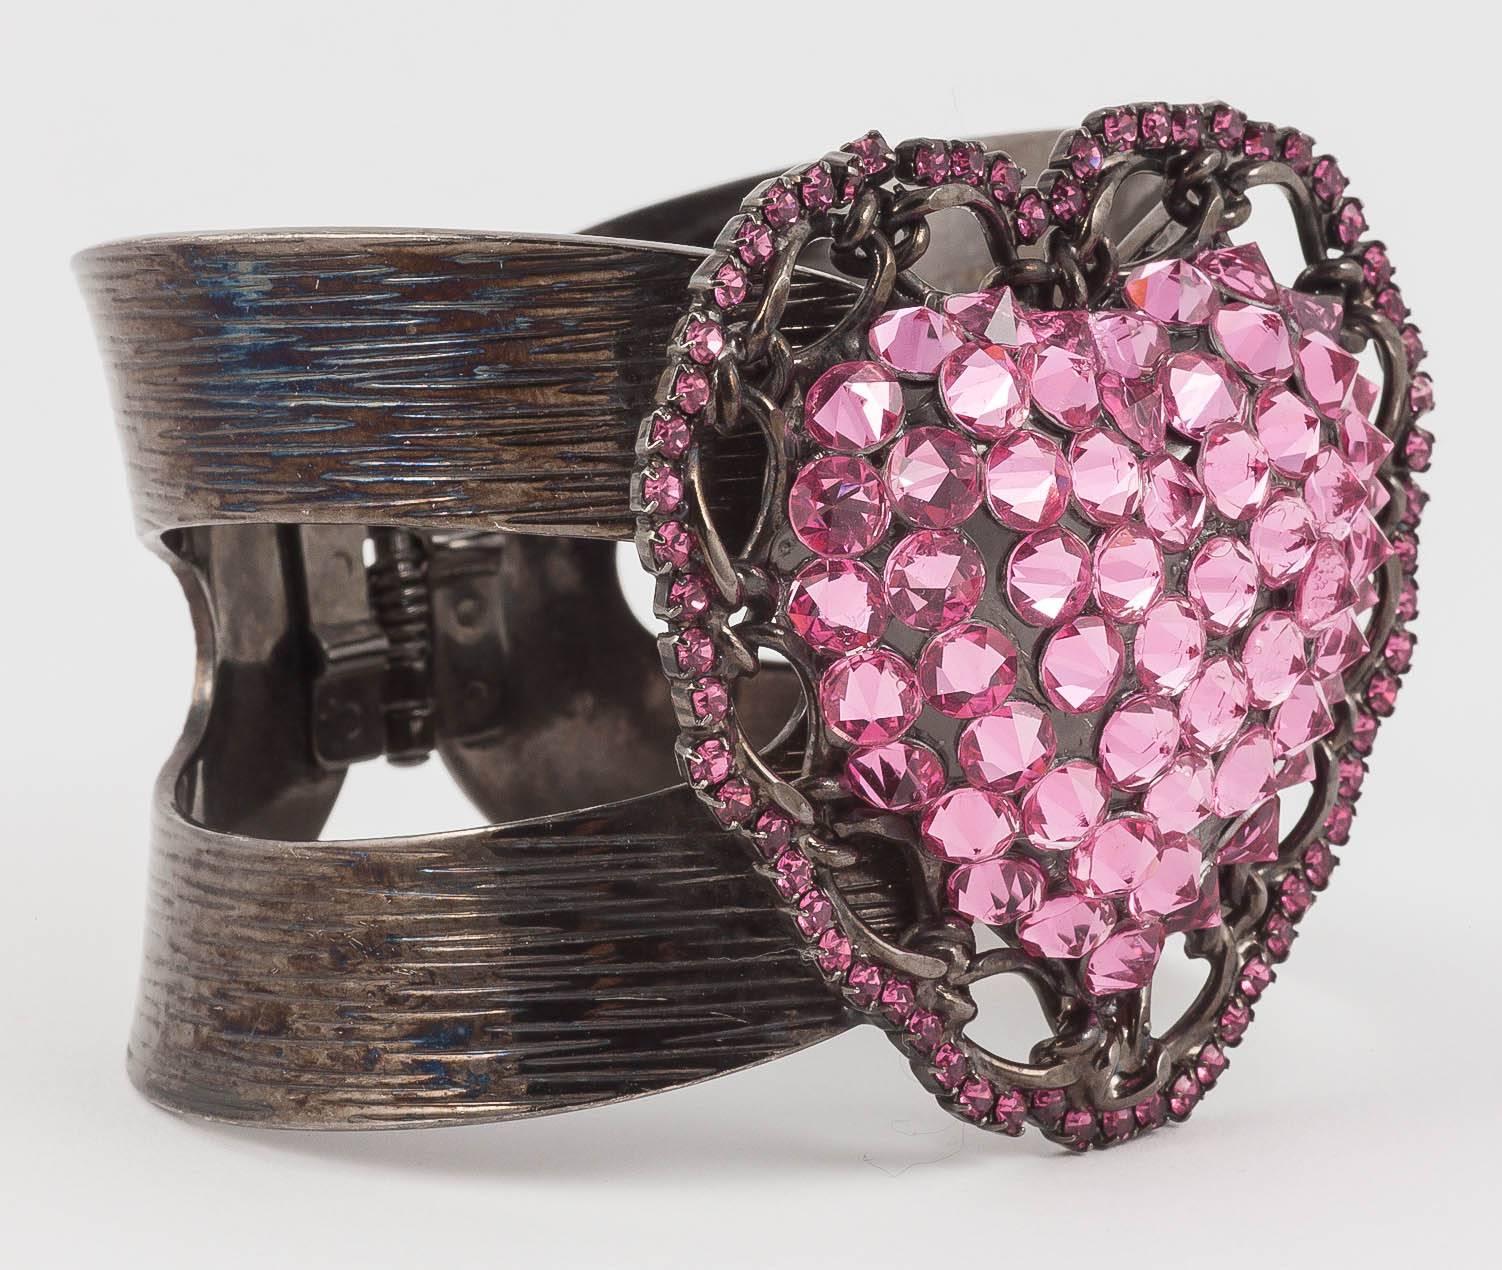 Well no one will miss you in this epic cuff! The jointed cuff is wrought in a very dark pewter colour which offsets the huge bright pink rhinestones perfectly making it look tough not just sweet. 
Lawrence Vrba designed fantastic Astec influence